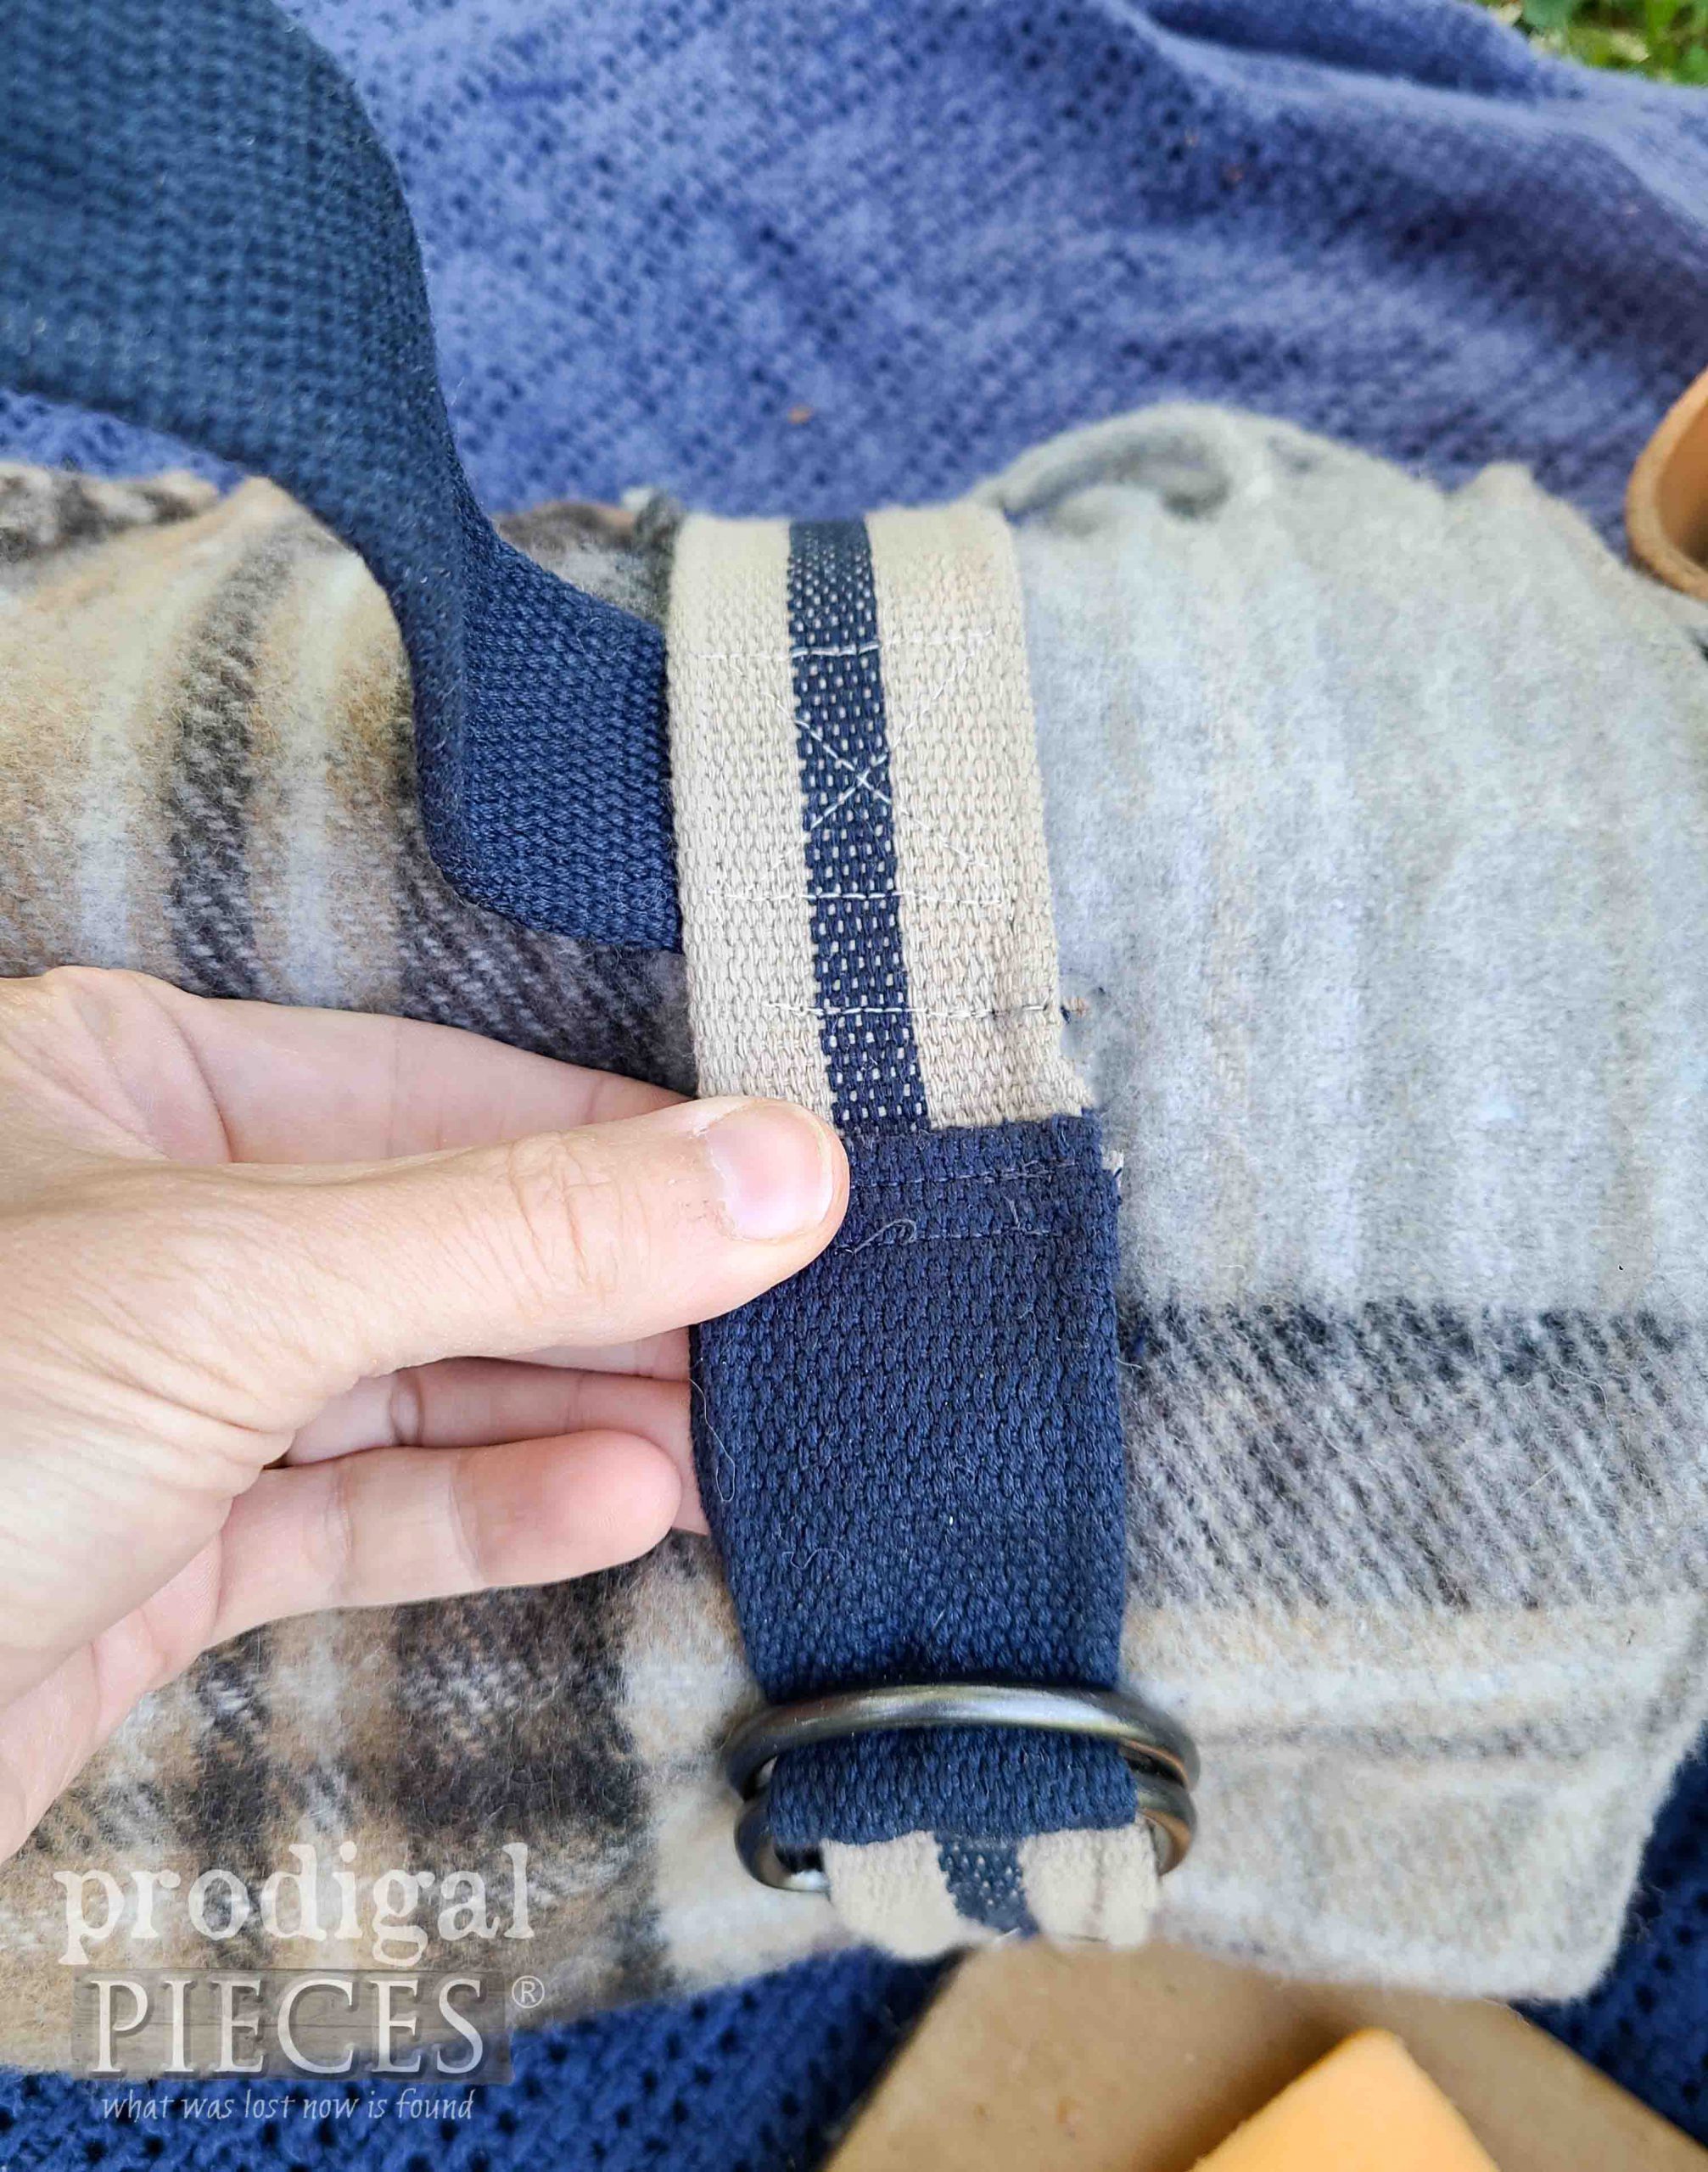 Box Stitching on DIY Blanket Carrier from Upcycled Belts by Larissa of Prodigal Pieces | prodigalpieces.com #prodigalpieces #diy #sewing #refashion #summer #giftidea